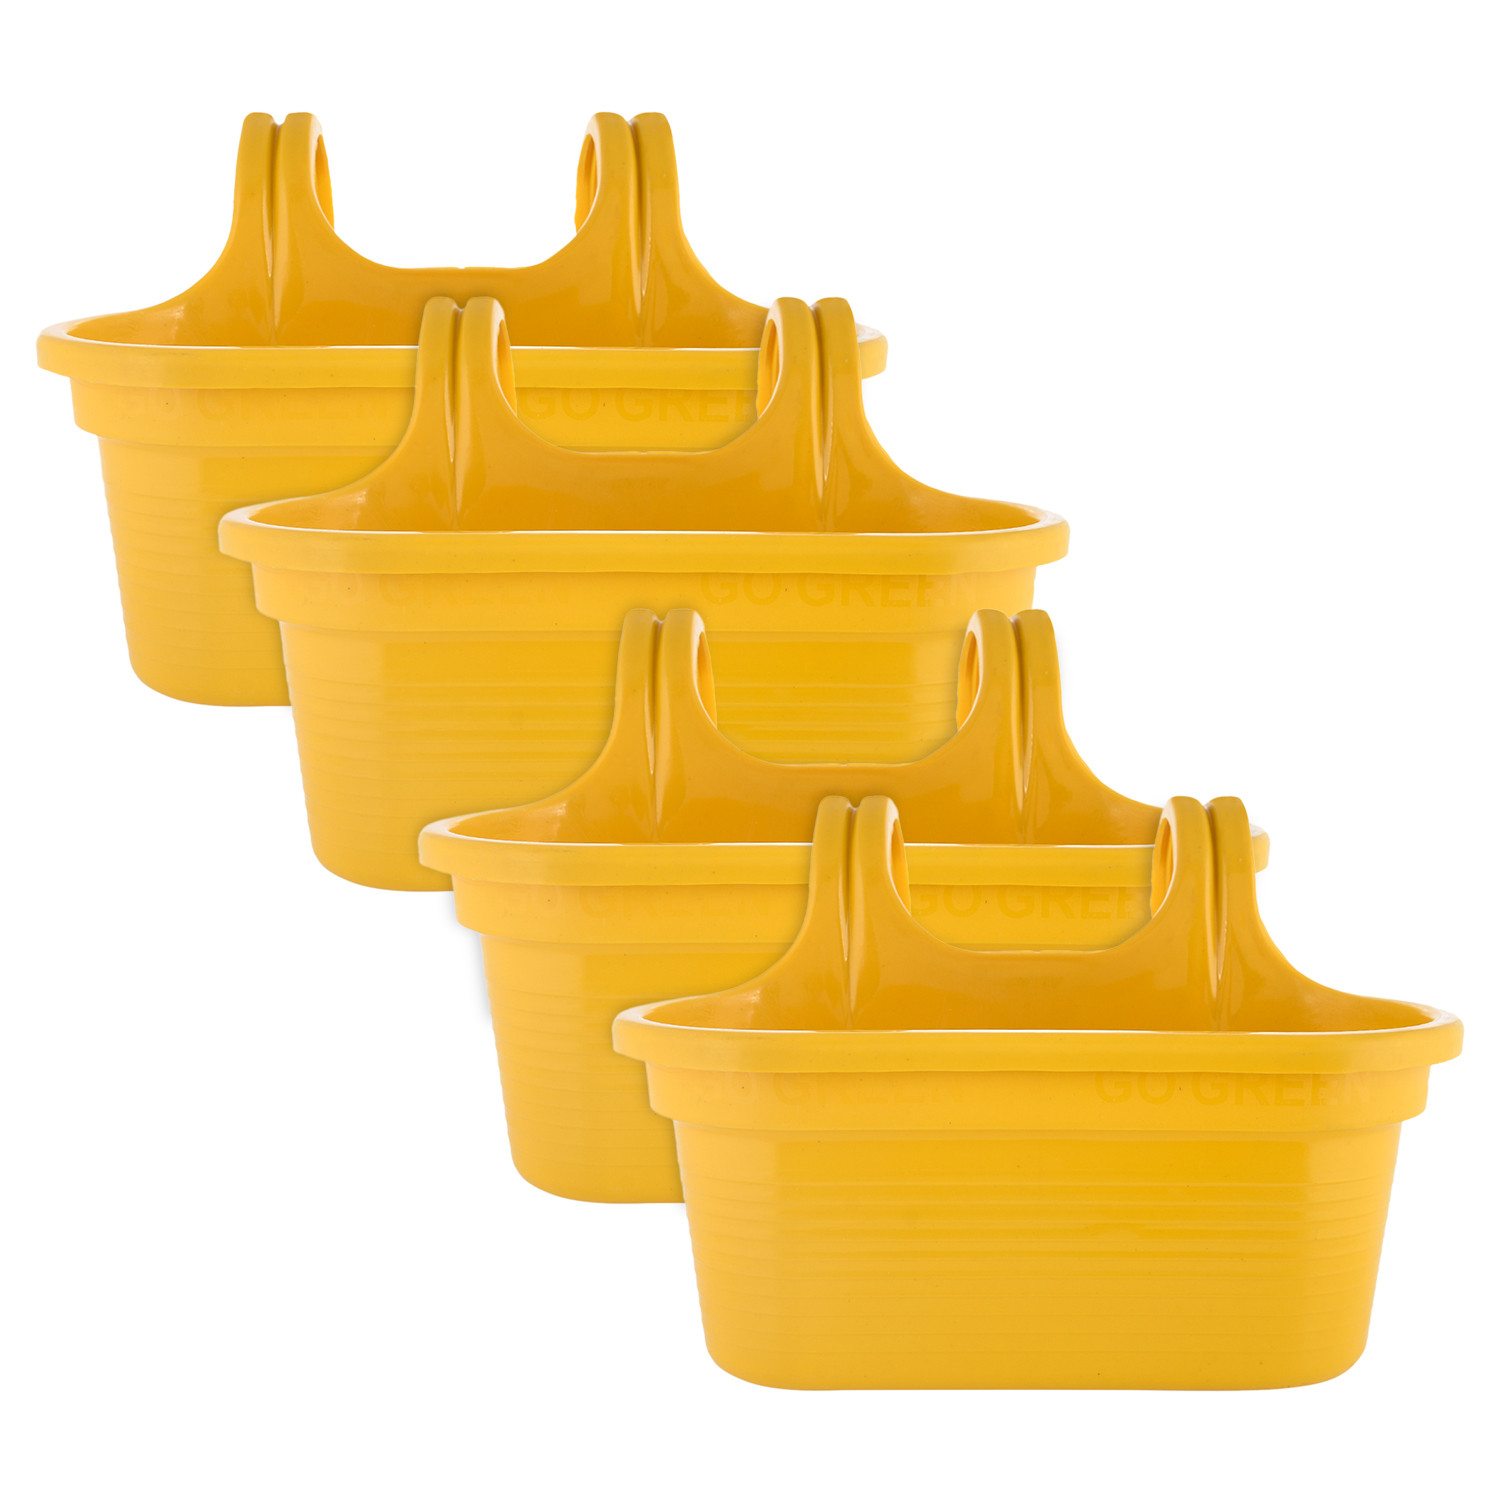 Kuber Industries Hanging Flower Pot|Double Hook Plant Container|Durable Plastic Glossy Finish Pots for Home|Balcony|Garden|12 Inch (Yellow)